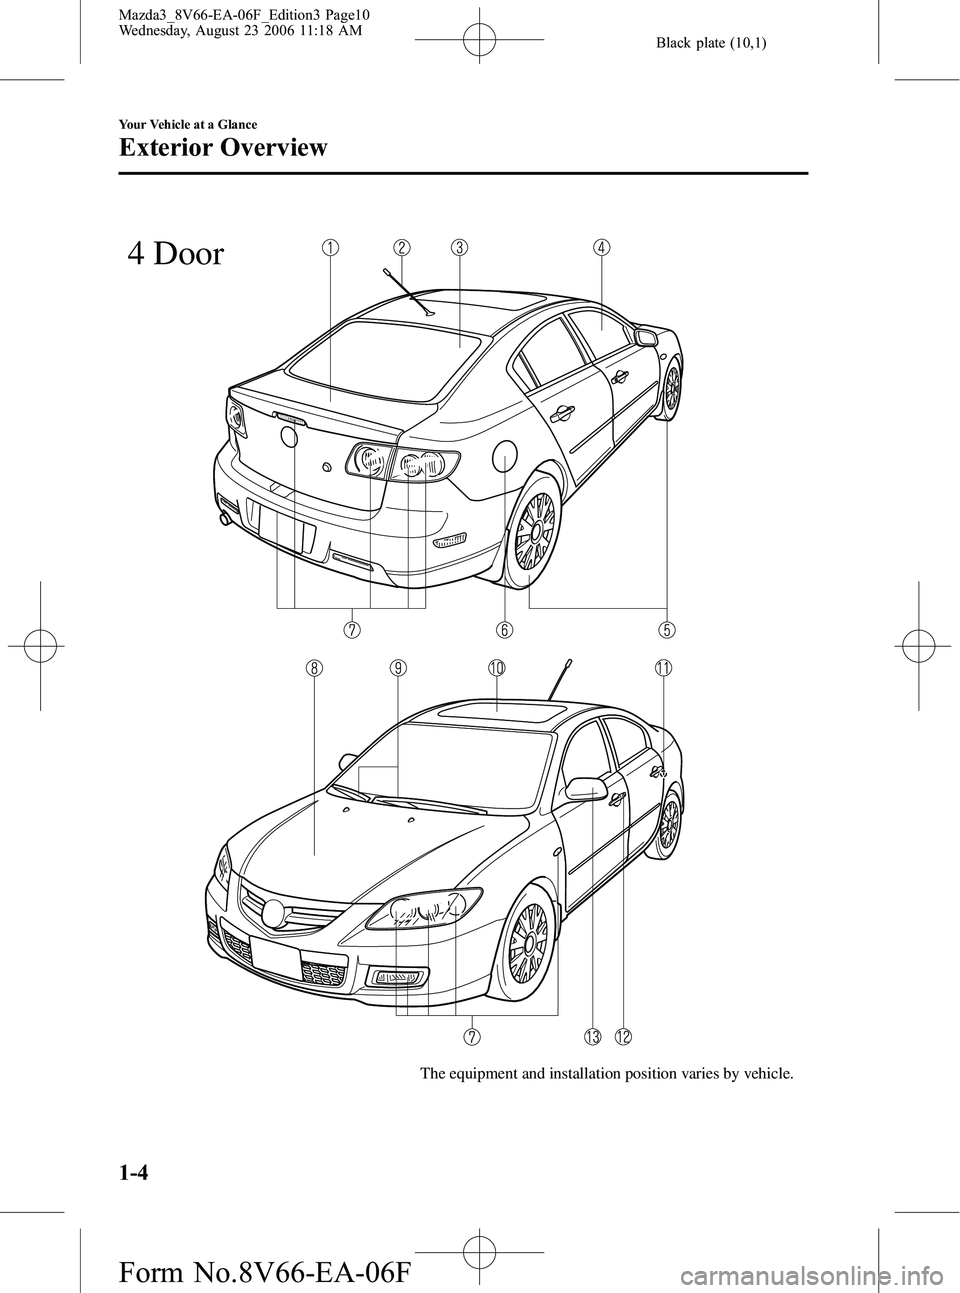 MAZDA MODEL 3 4-DOOR 2007  Owners Manual Black plate (10,1)
The equipment and installation position varies by vehicle.
4 Door
1-4
Your Vehicle at a Glance
Exterior Overview
Mazda3_8V66-EA-06F_Edition3 Page10
Wednesday, August 23 2006 11:18 A